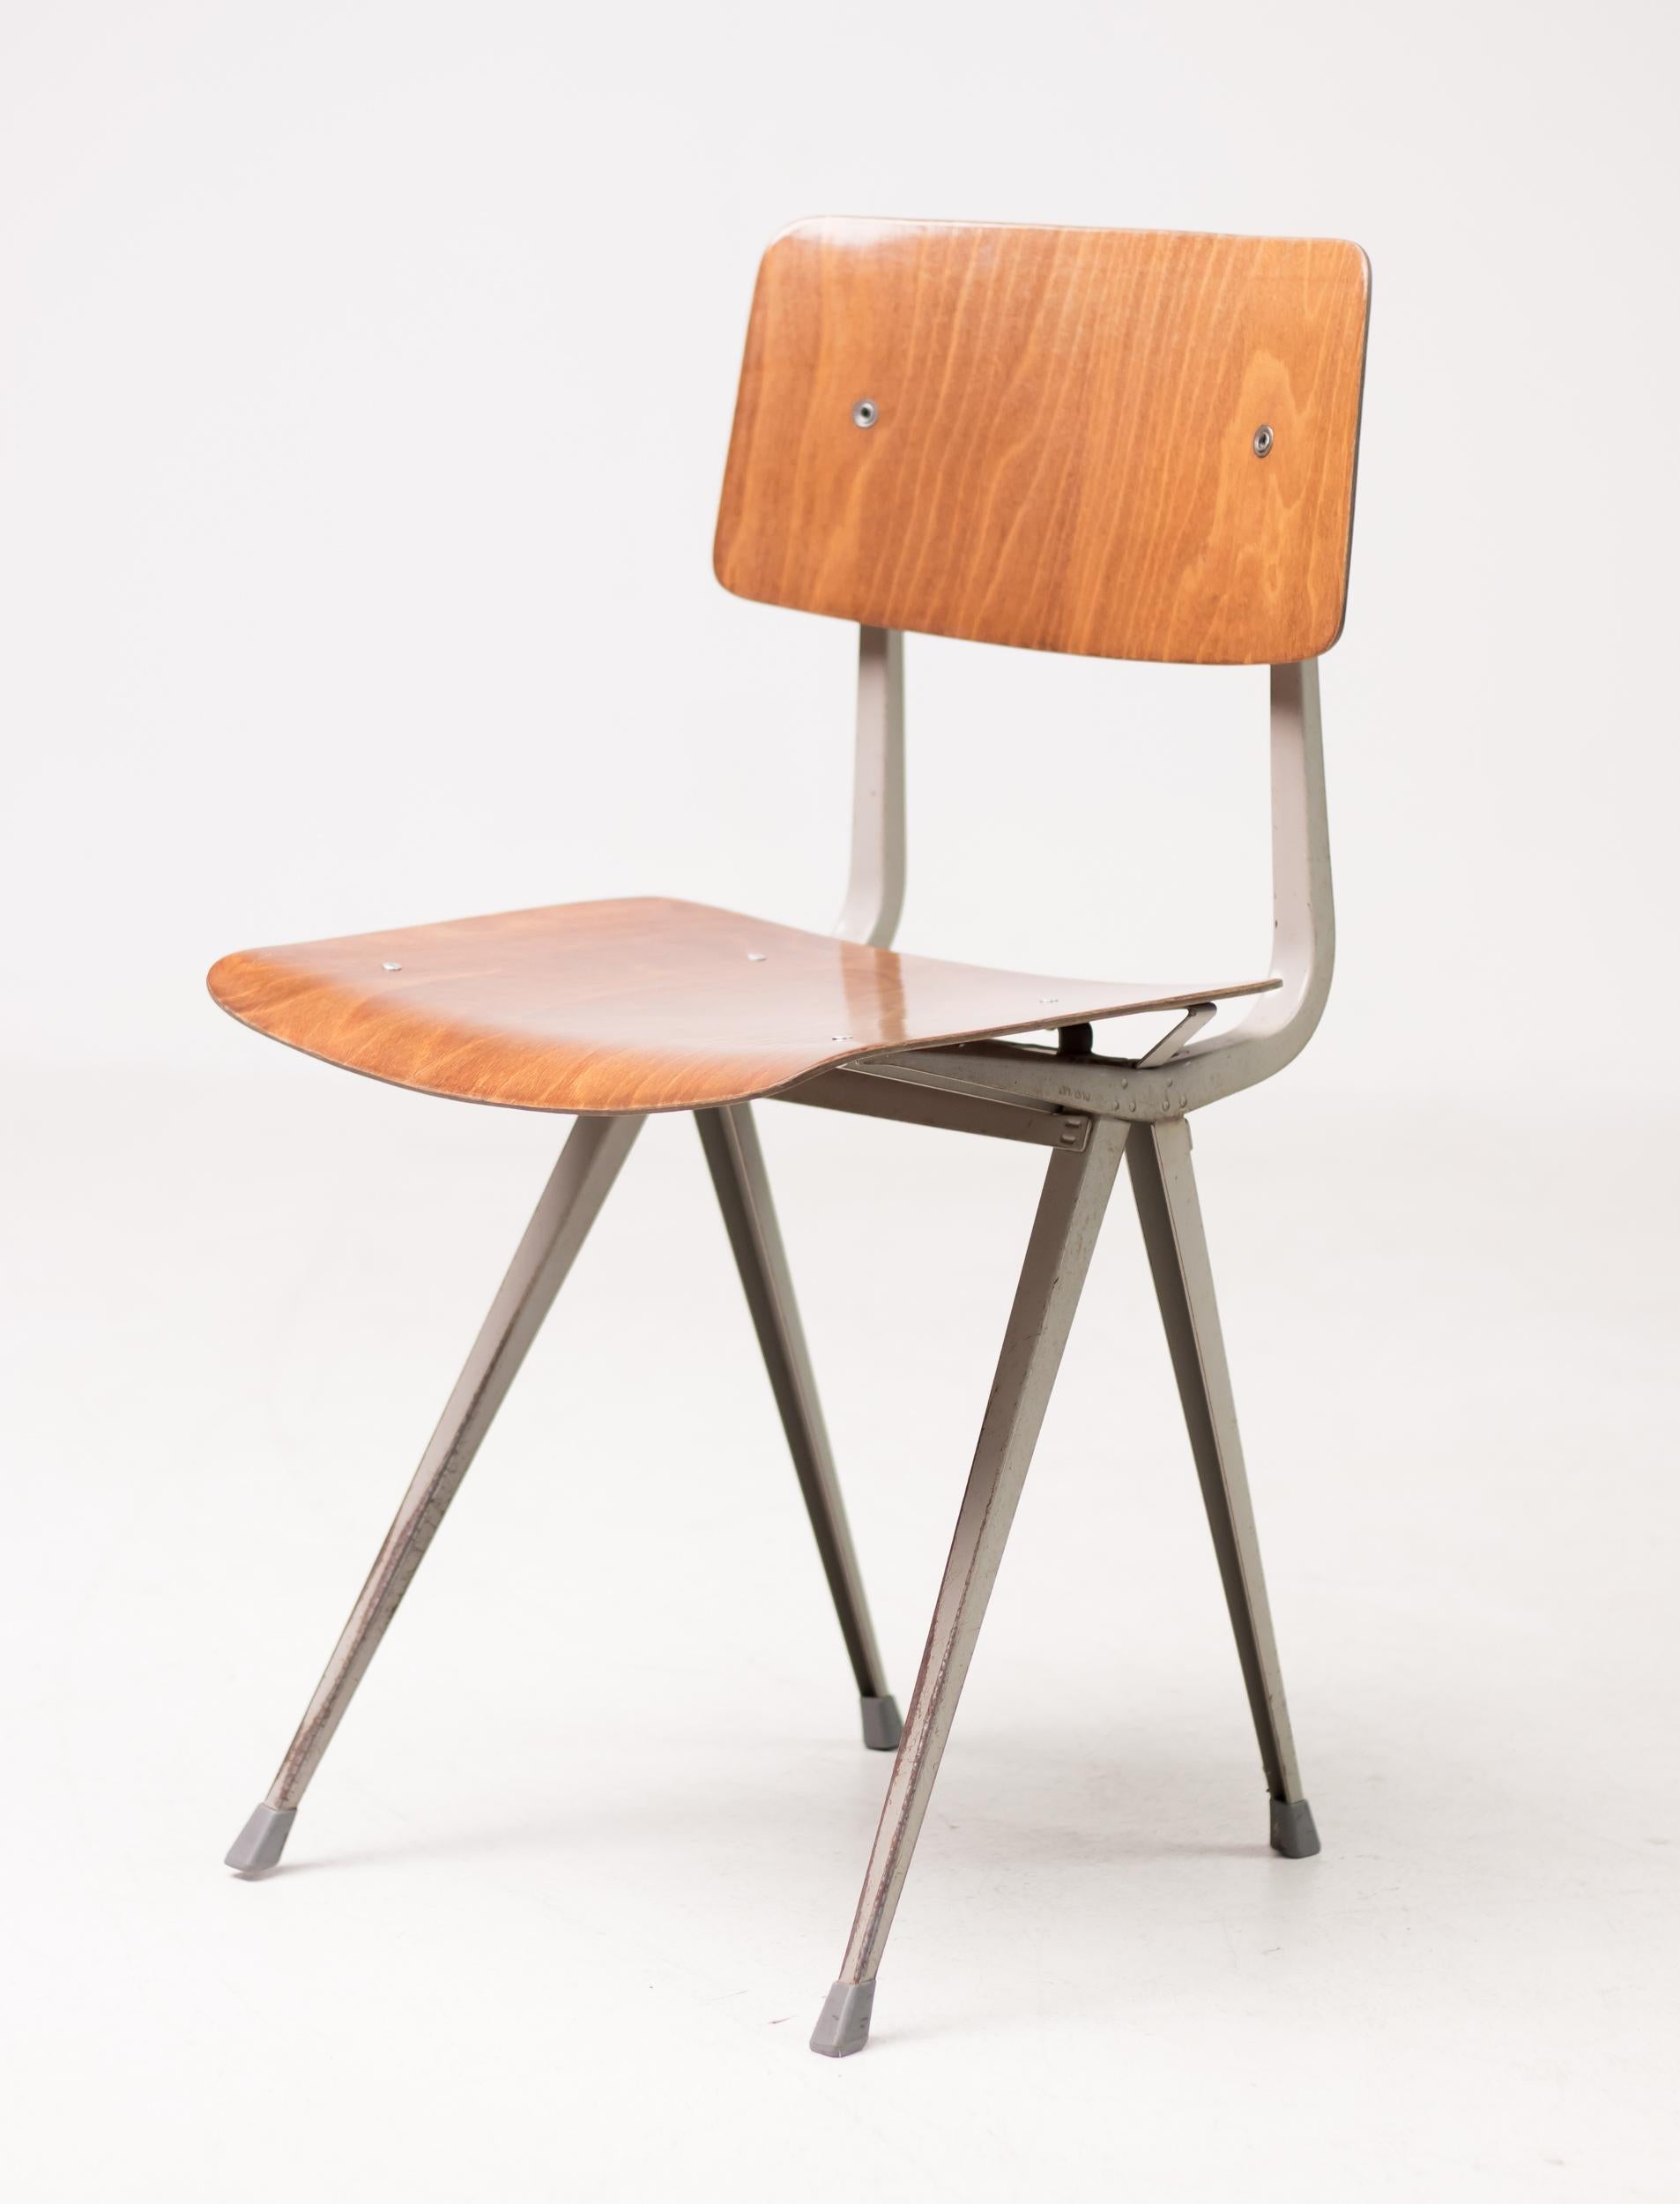 Set of six result chairs, designed by Friso Kramer for Ahrend-De Cirkel in 1952.
Innovative bent sheet steel frame with pressed wood seat and back.
Embossed logo.